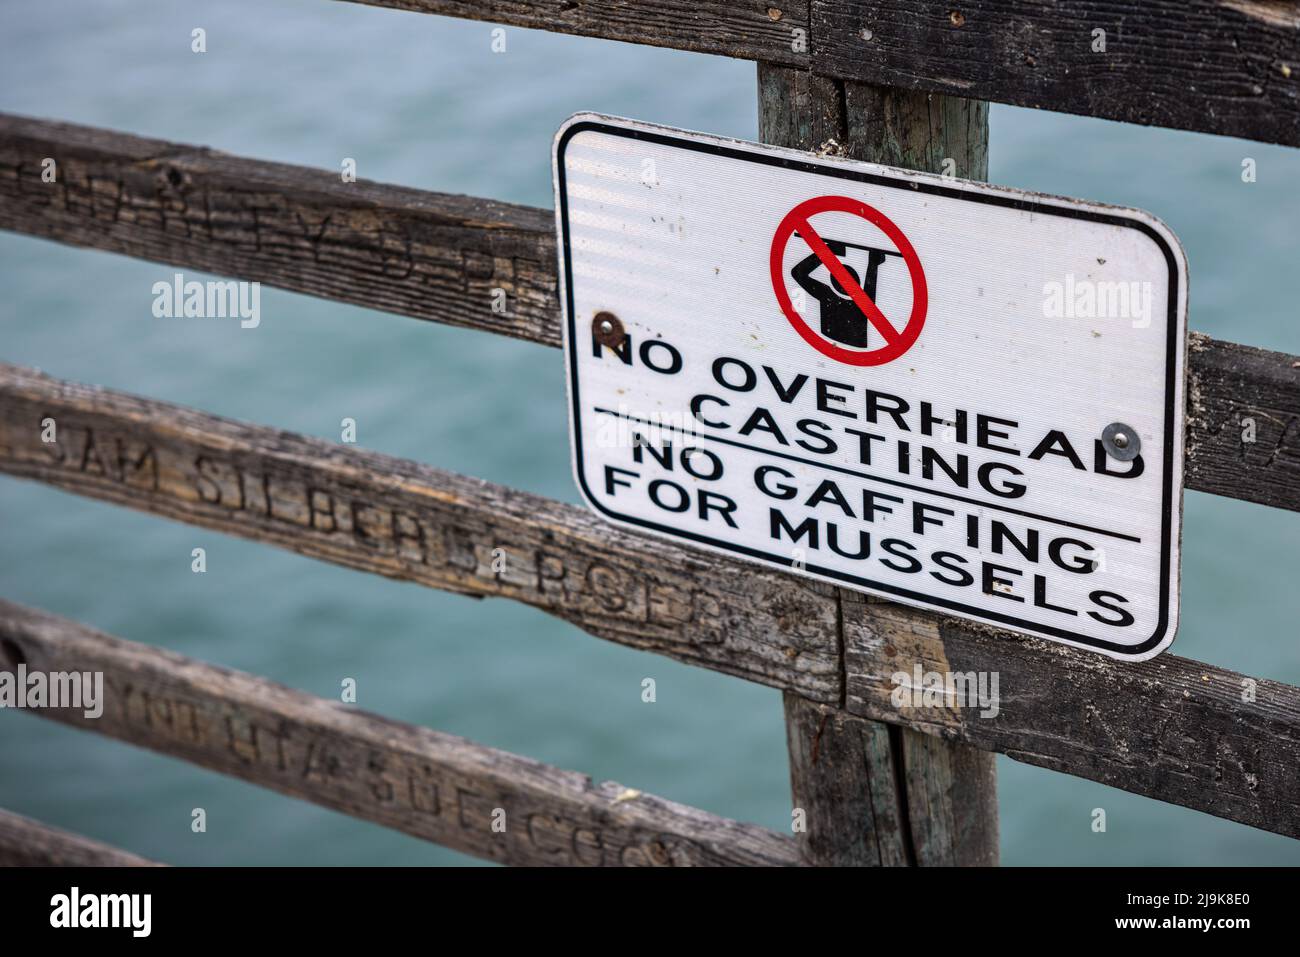 A sign telling fisherman to not overhad cast or gaff for mussels Stock Photo